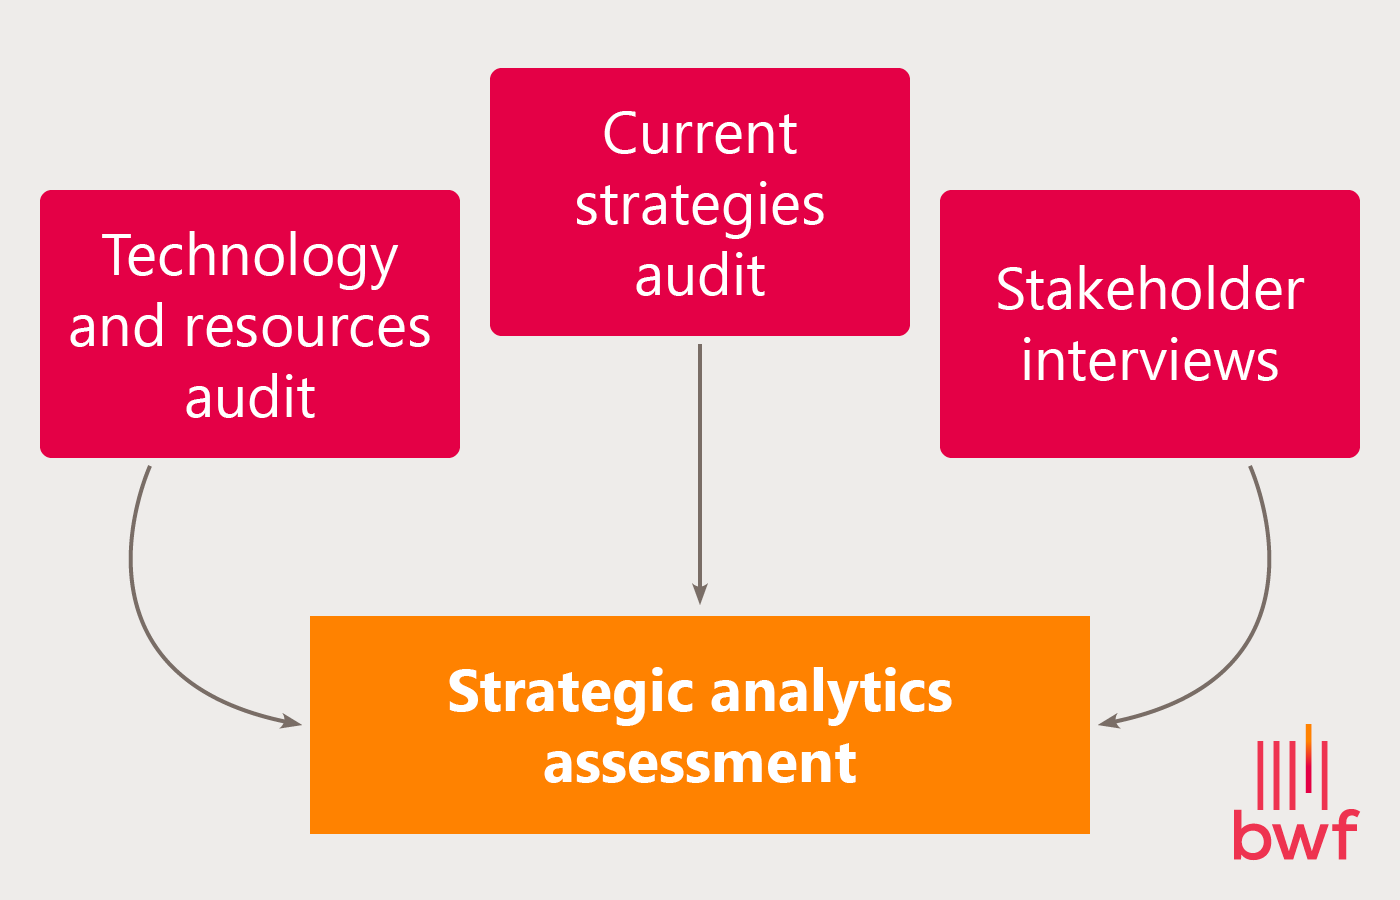 This image shows the components of a strategic analytics assessment for healthcare fundraising (outlined below). 